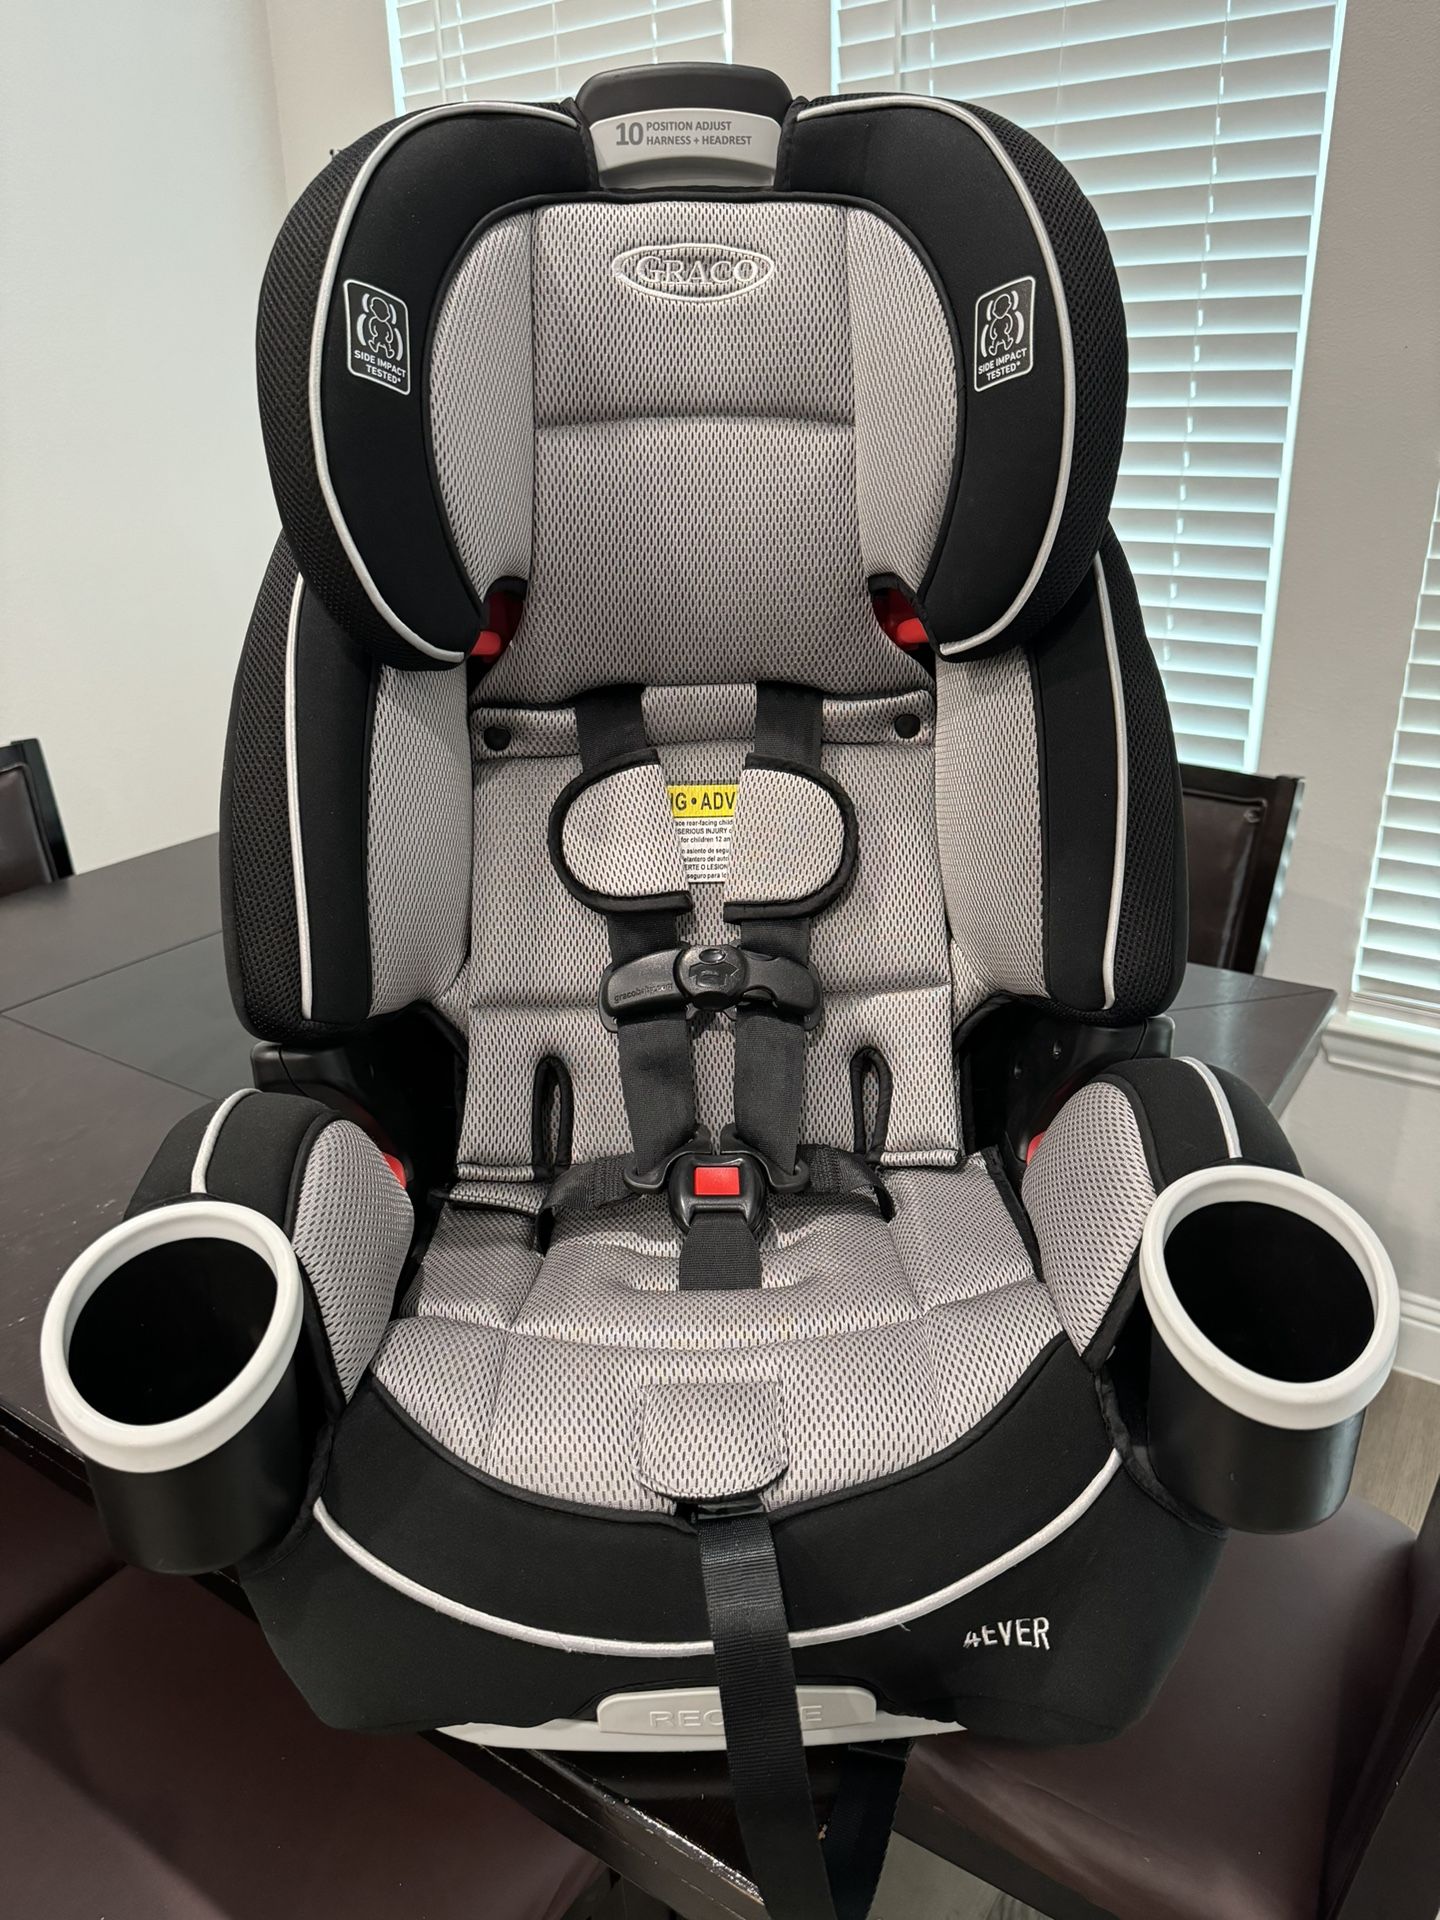 Graco Convertible Car Seat 4Ever 4-in-1